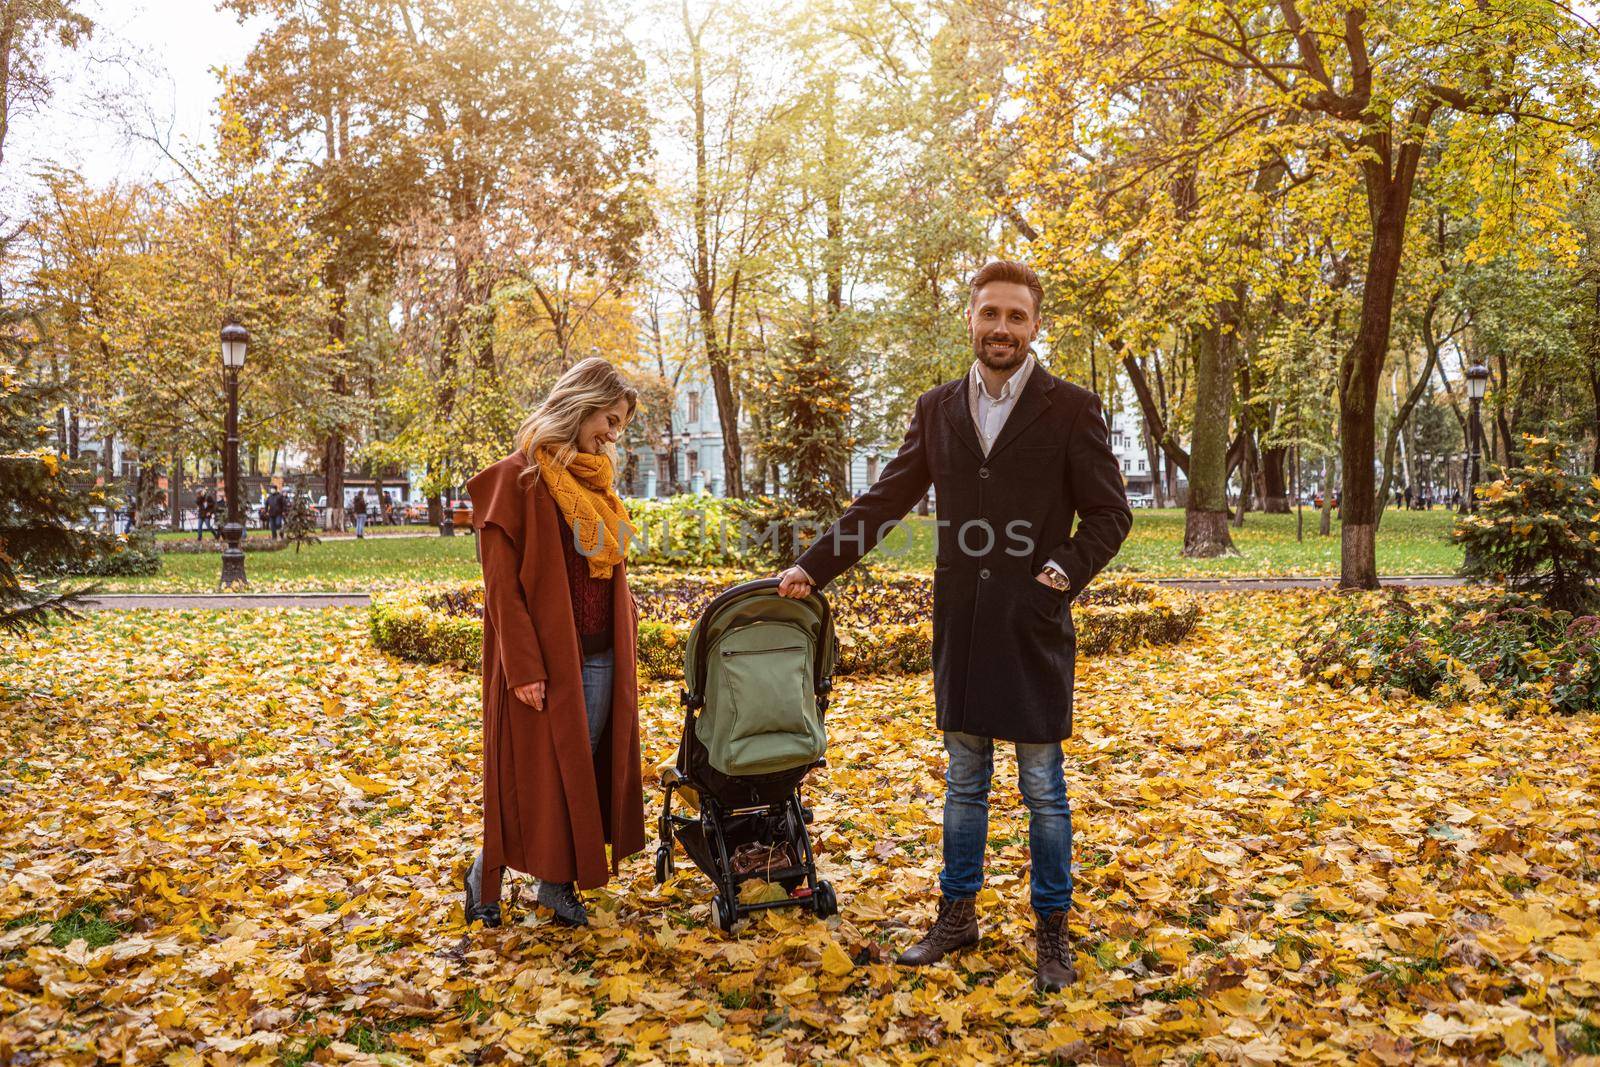 Walking in an autumn park young family with a newborn baby in a stroller. Family outdoors in a golden autumn park. Tinted image. 